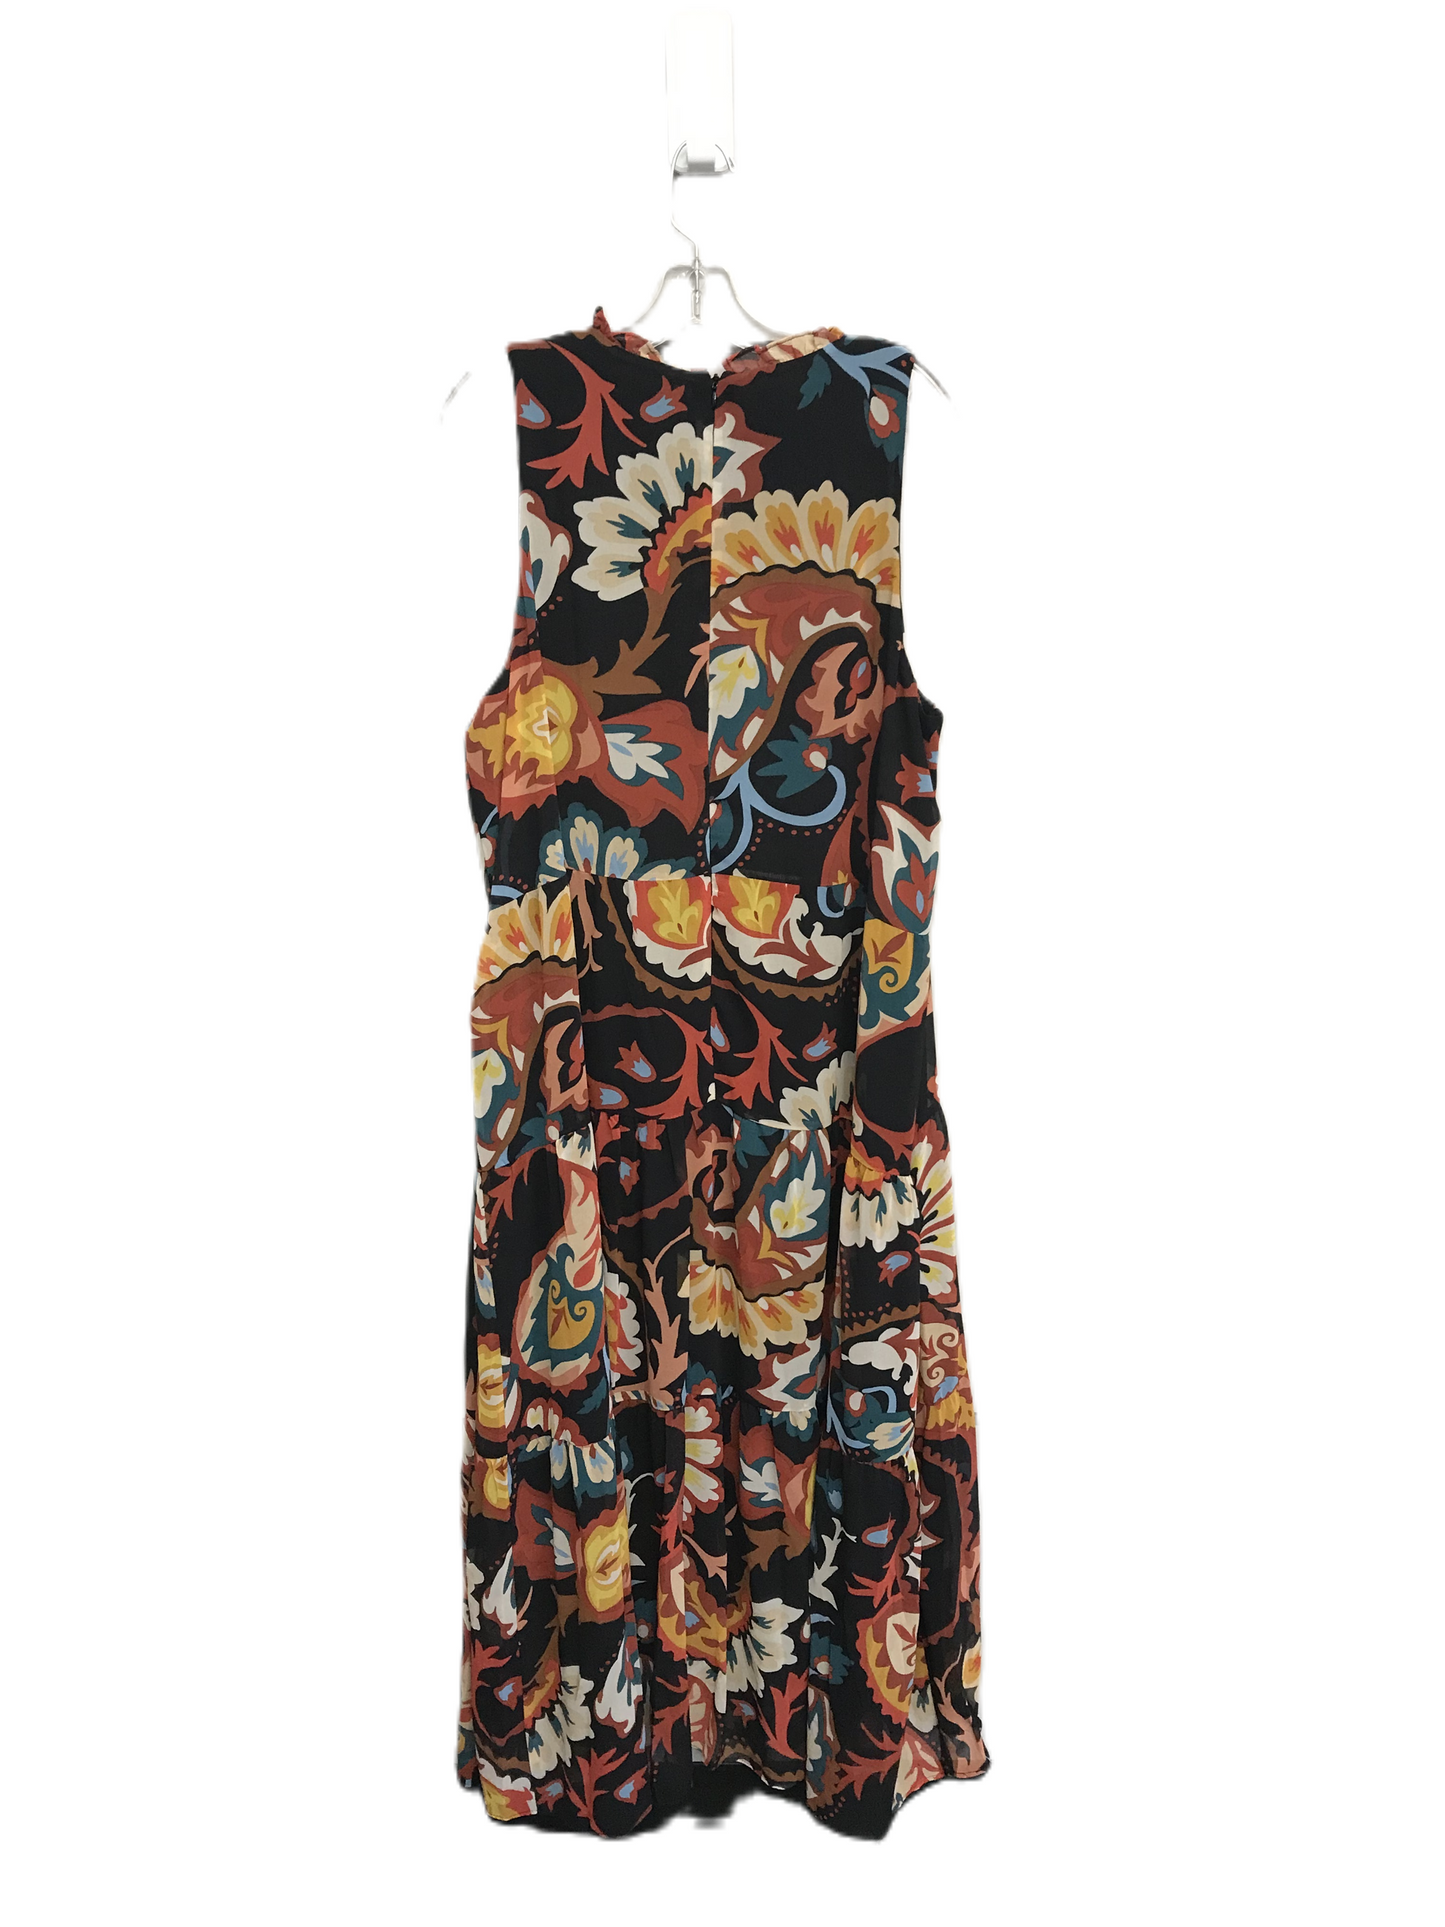 Multi-colored Dress Casual Maxi By Chicos, Size: 1x